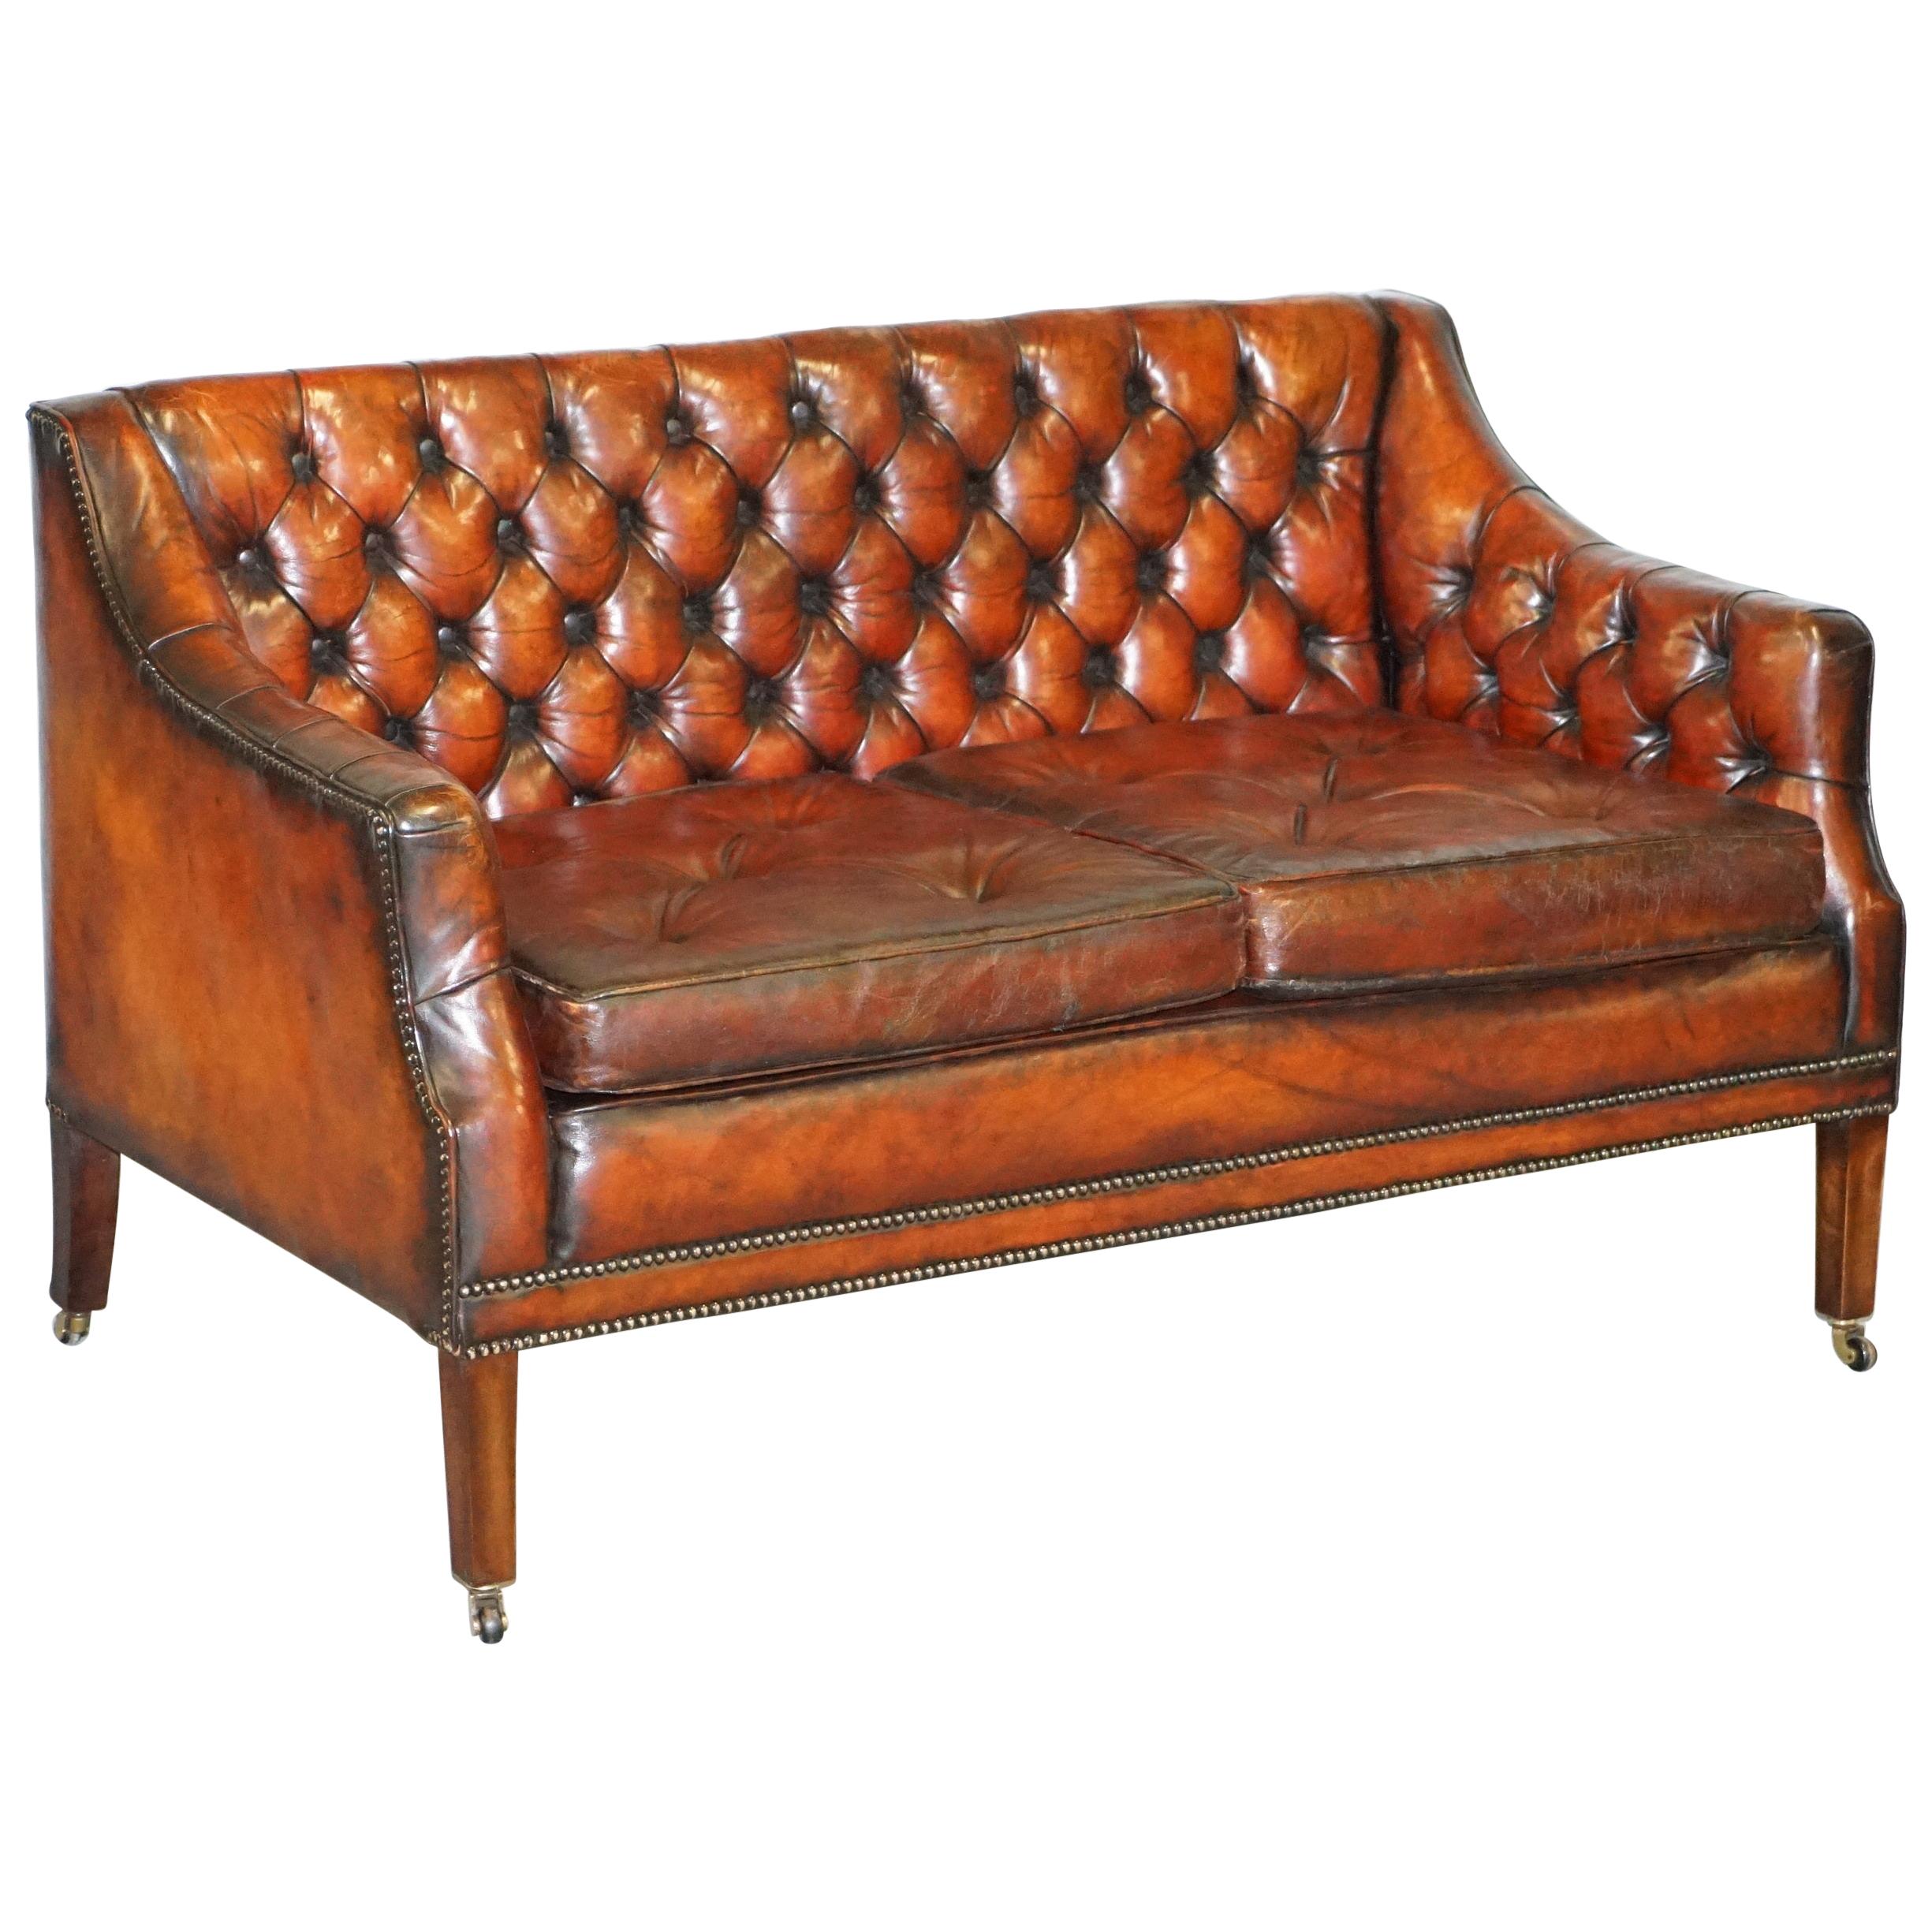 Fully Restored Whisky Brown Leather Lutyen's Viceroy Sofa, circa 1900 